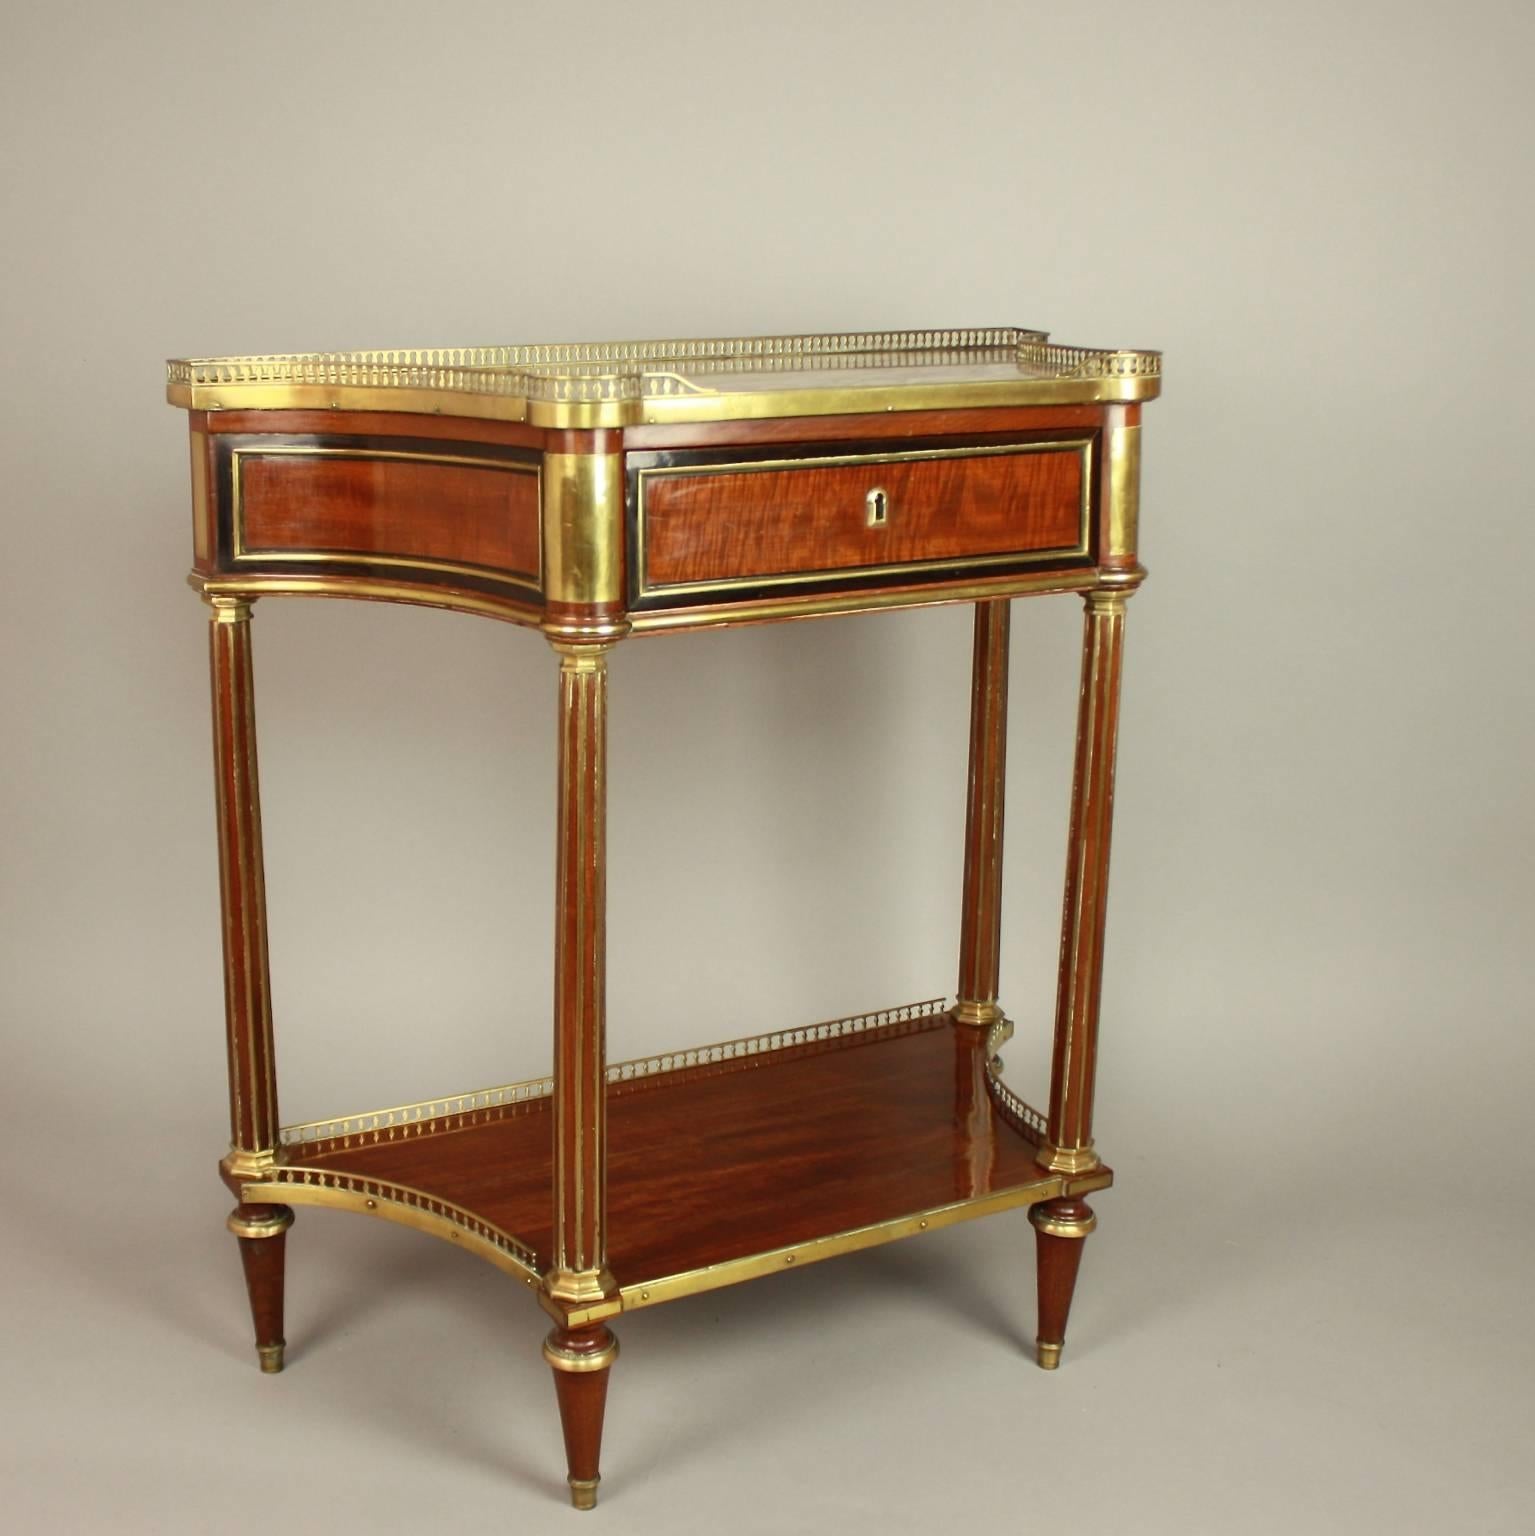 A fine Louis XVI gilt-bronze mounted satinwood and mahogany console table in the manner of Claude-Charles Saunier (1735-1807). 
The console table with a concave-sided rectangular top with an inset red and white marble top 'Sarrancolin Ope´ra' with